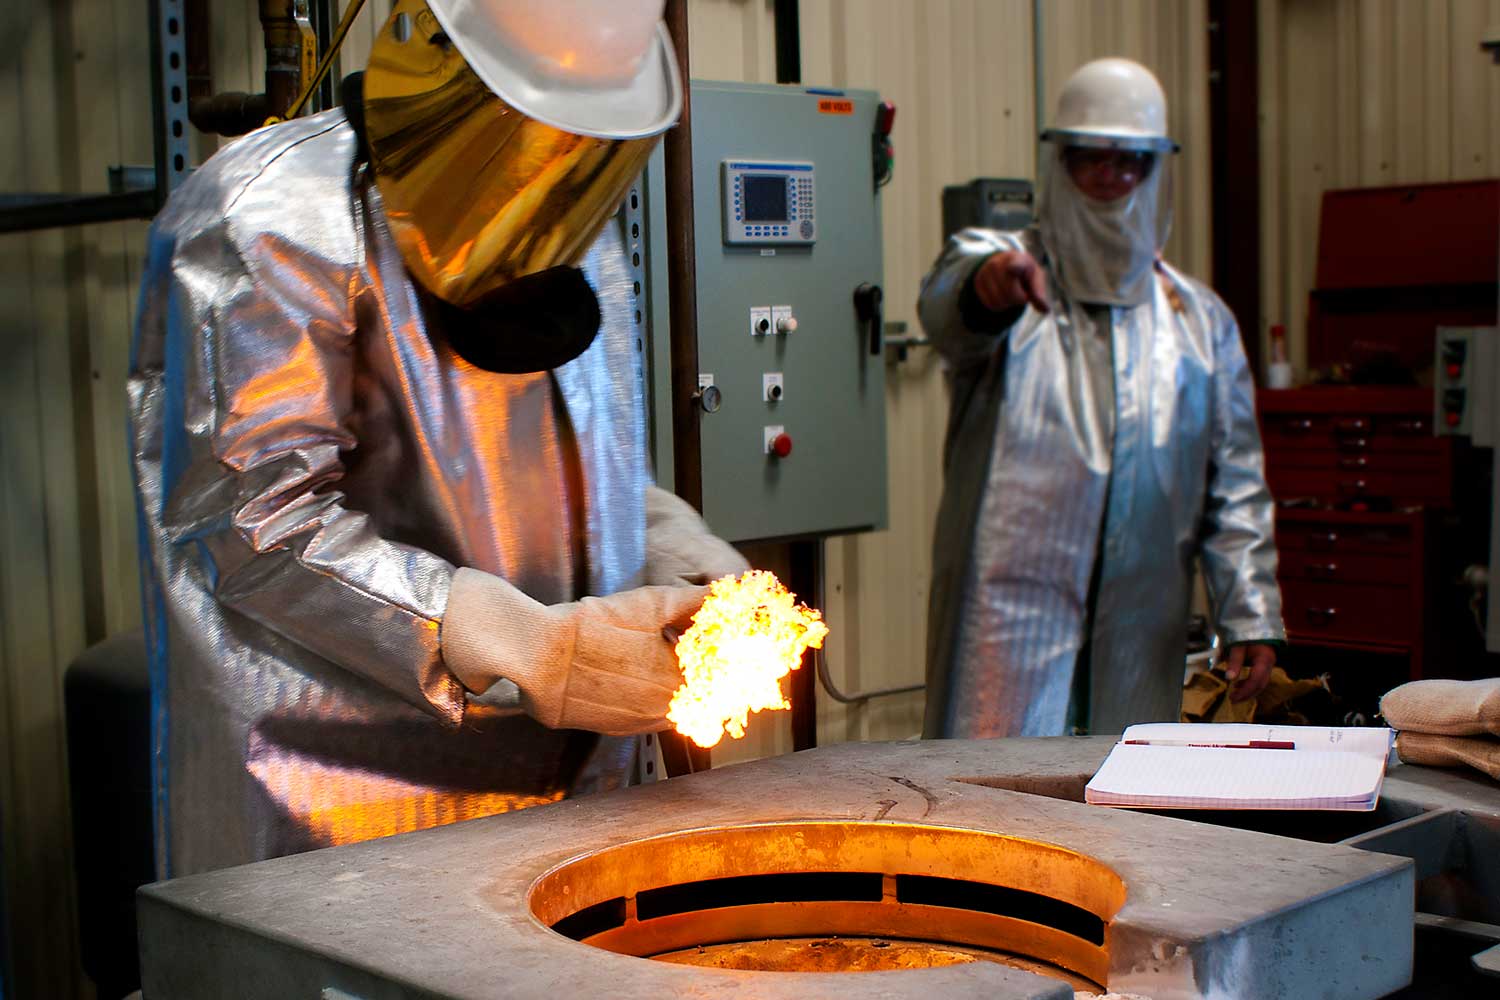 A Material Science student works with molten material in a lab and is wearing a fire suit.